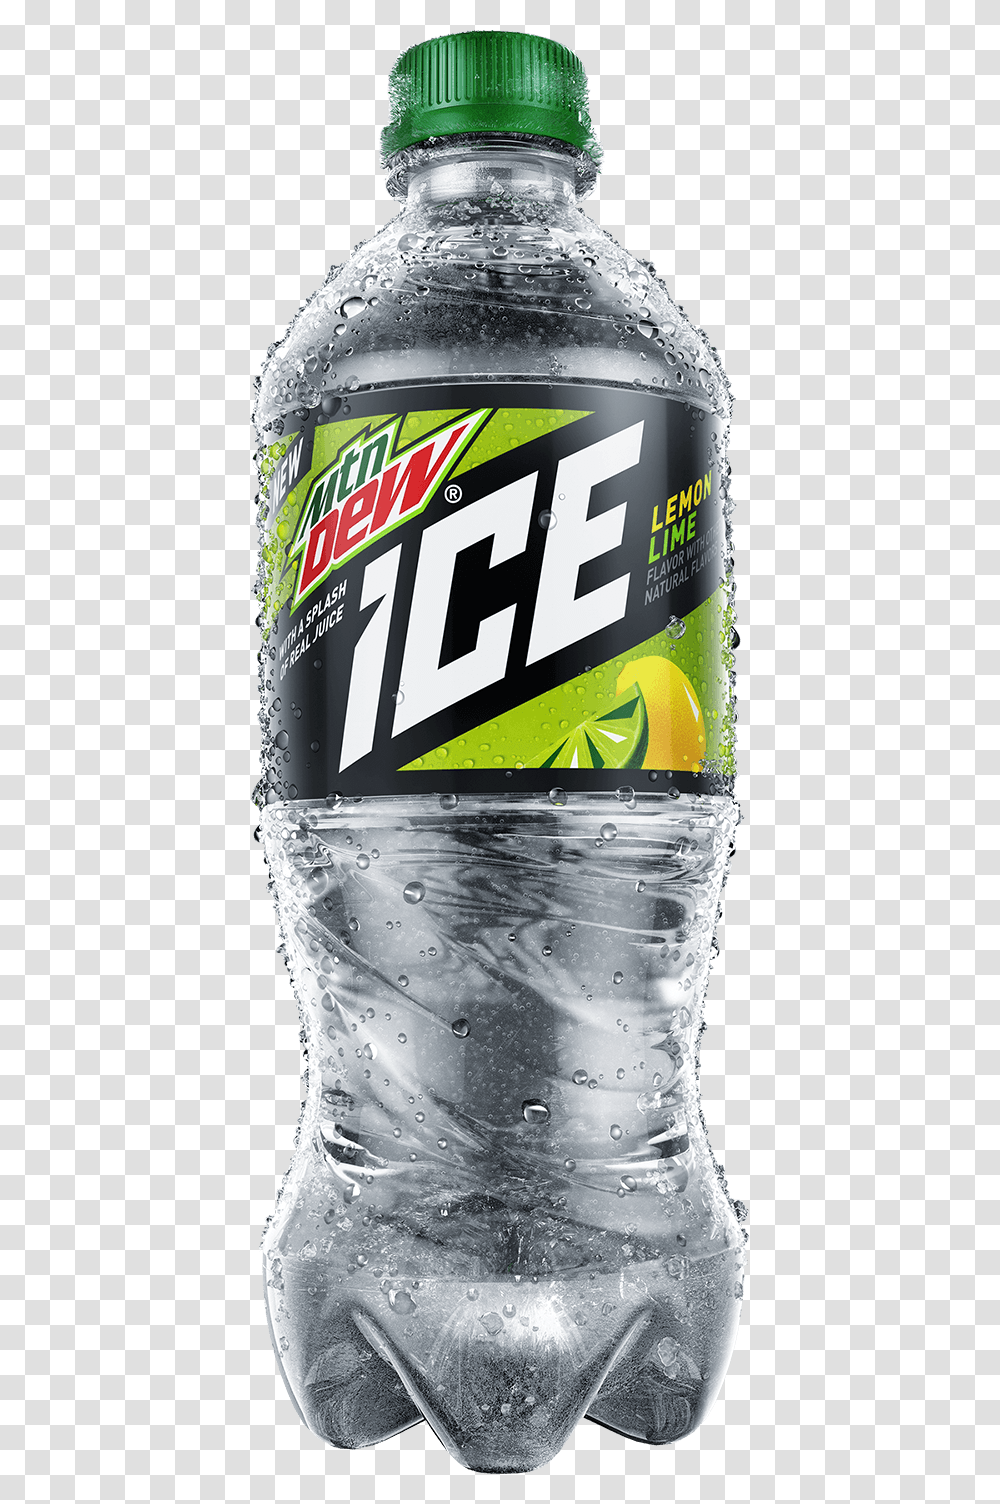 Archived Diet Mountain Dew Ice, Mineral Water, Beverage, Water Bottle, Drink Transparent Png